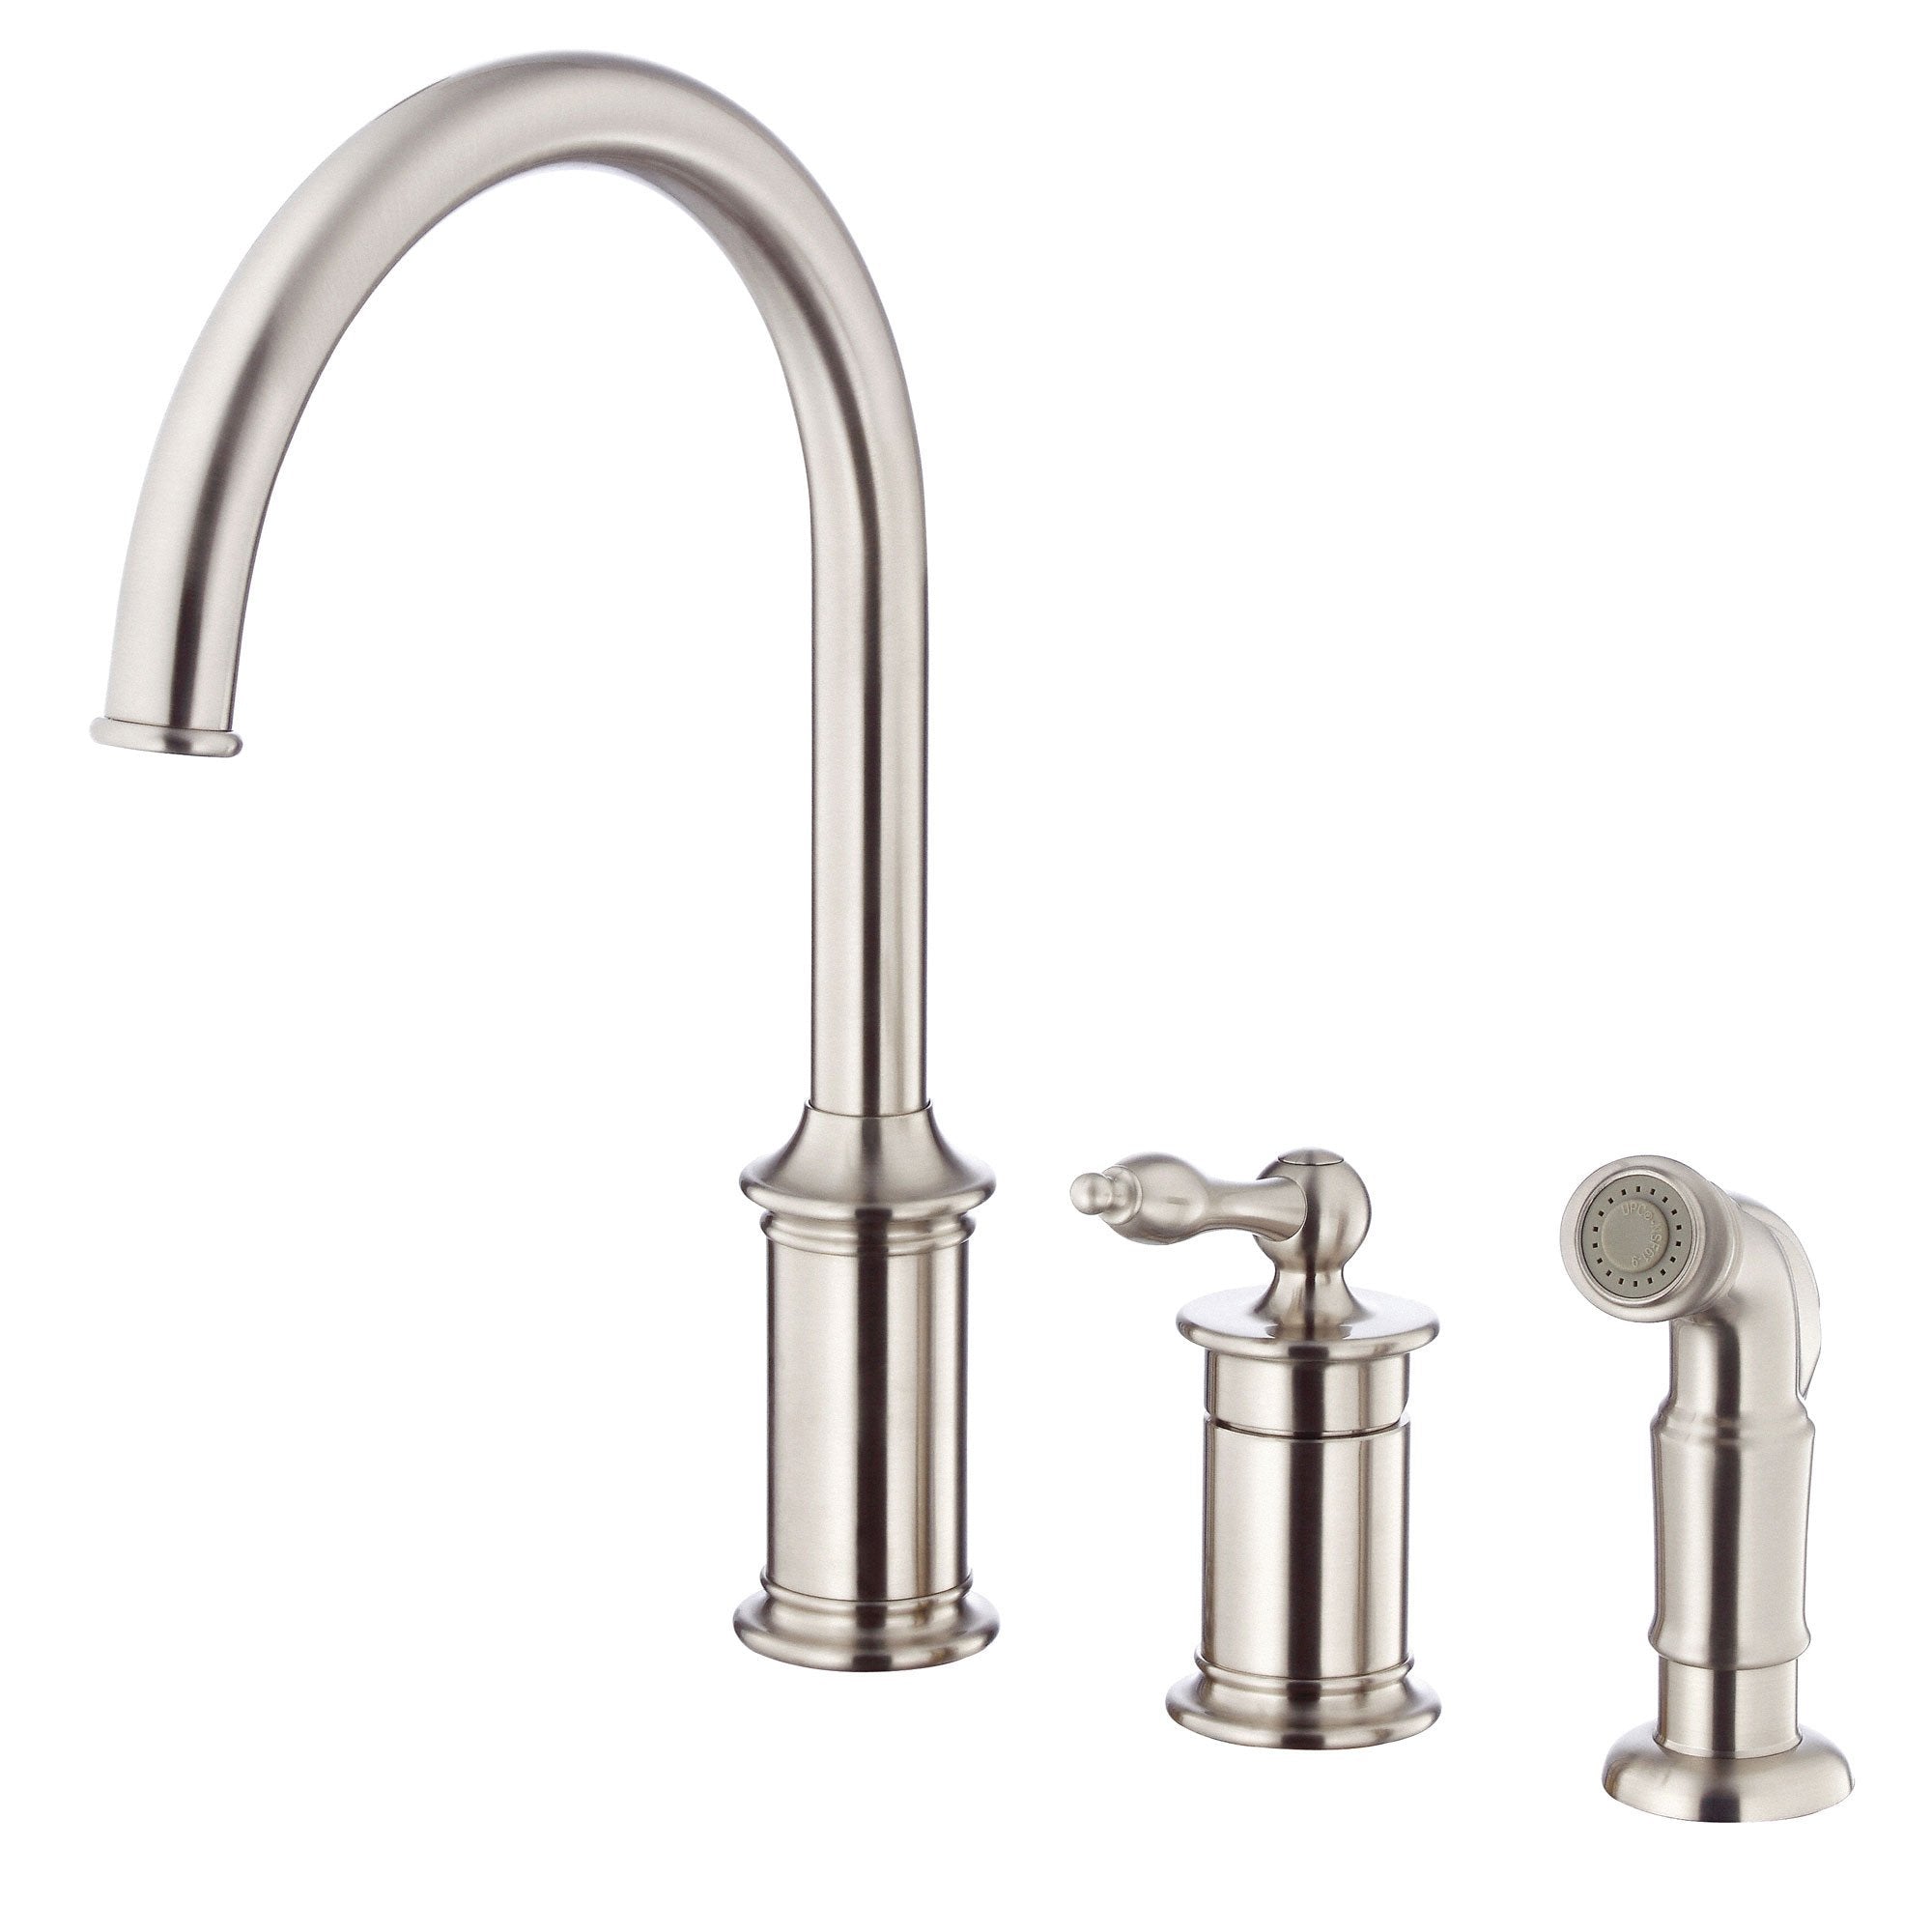 Danze Prince Stainless Steel Single Handle Widespread Kitchen Faucet with Spray